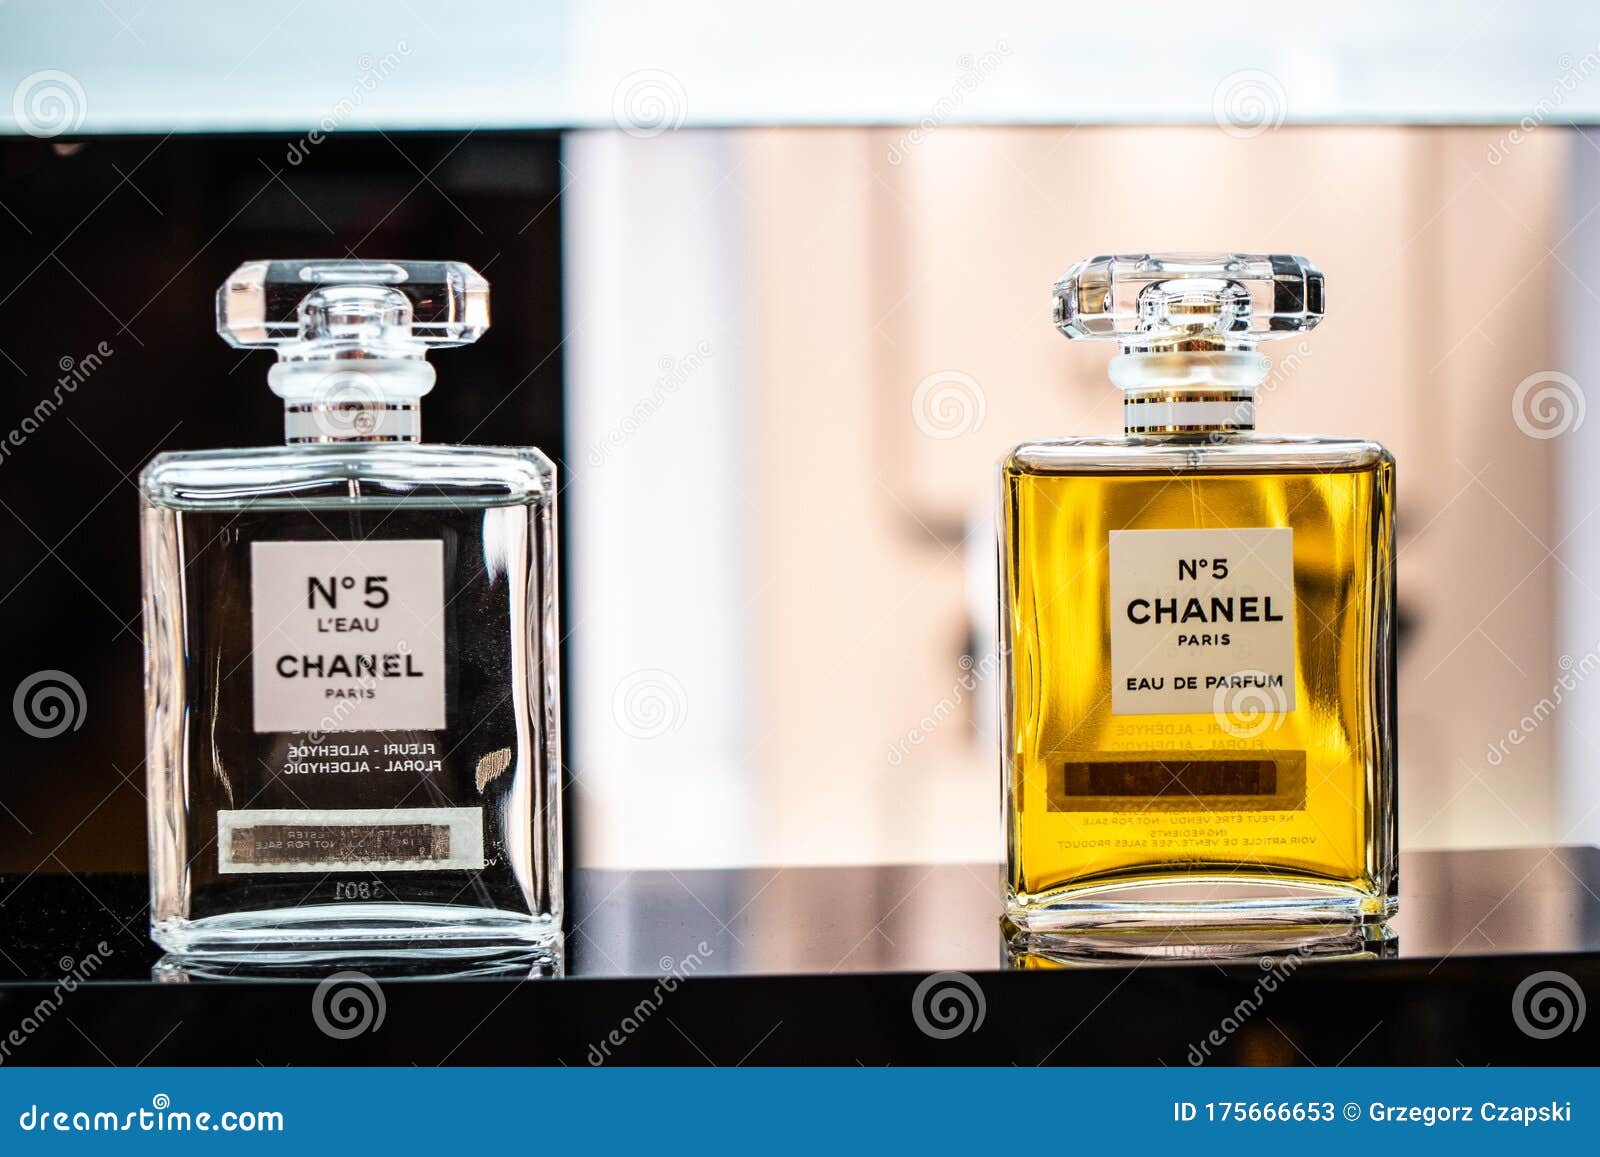 coco chanel first perfume